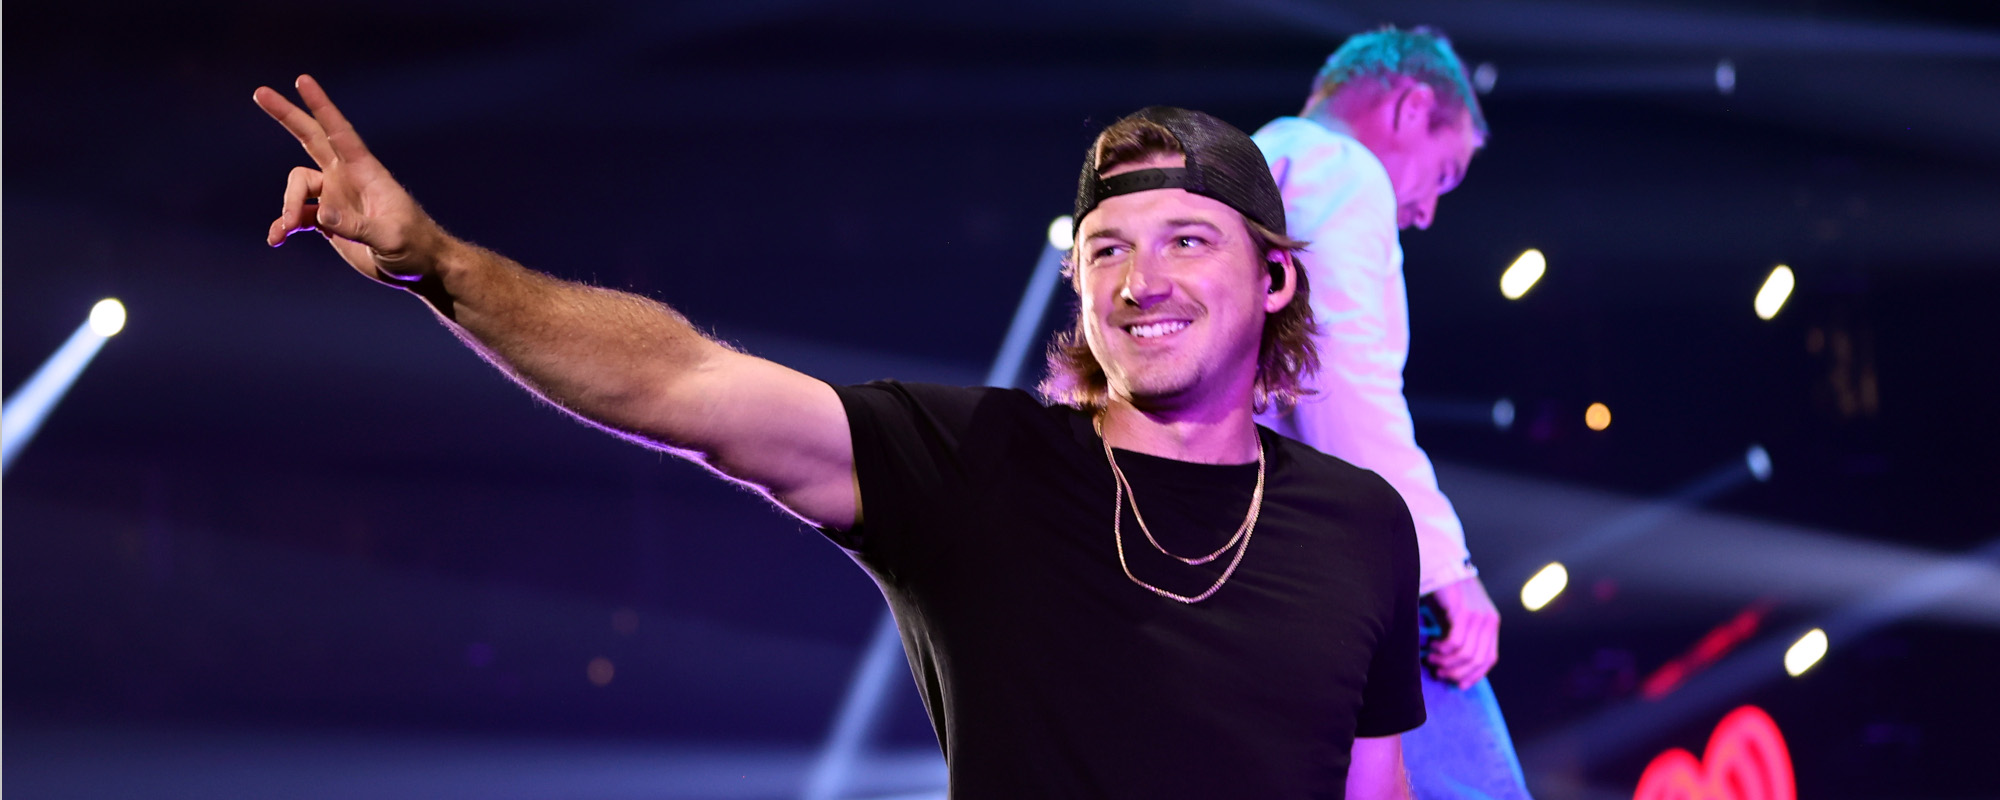 Morgan Wallen Gives Back, Donating $100K to Help Chicago Youth